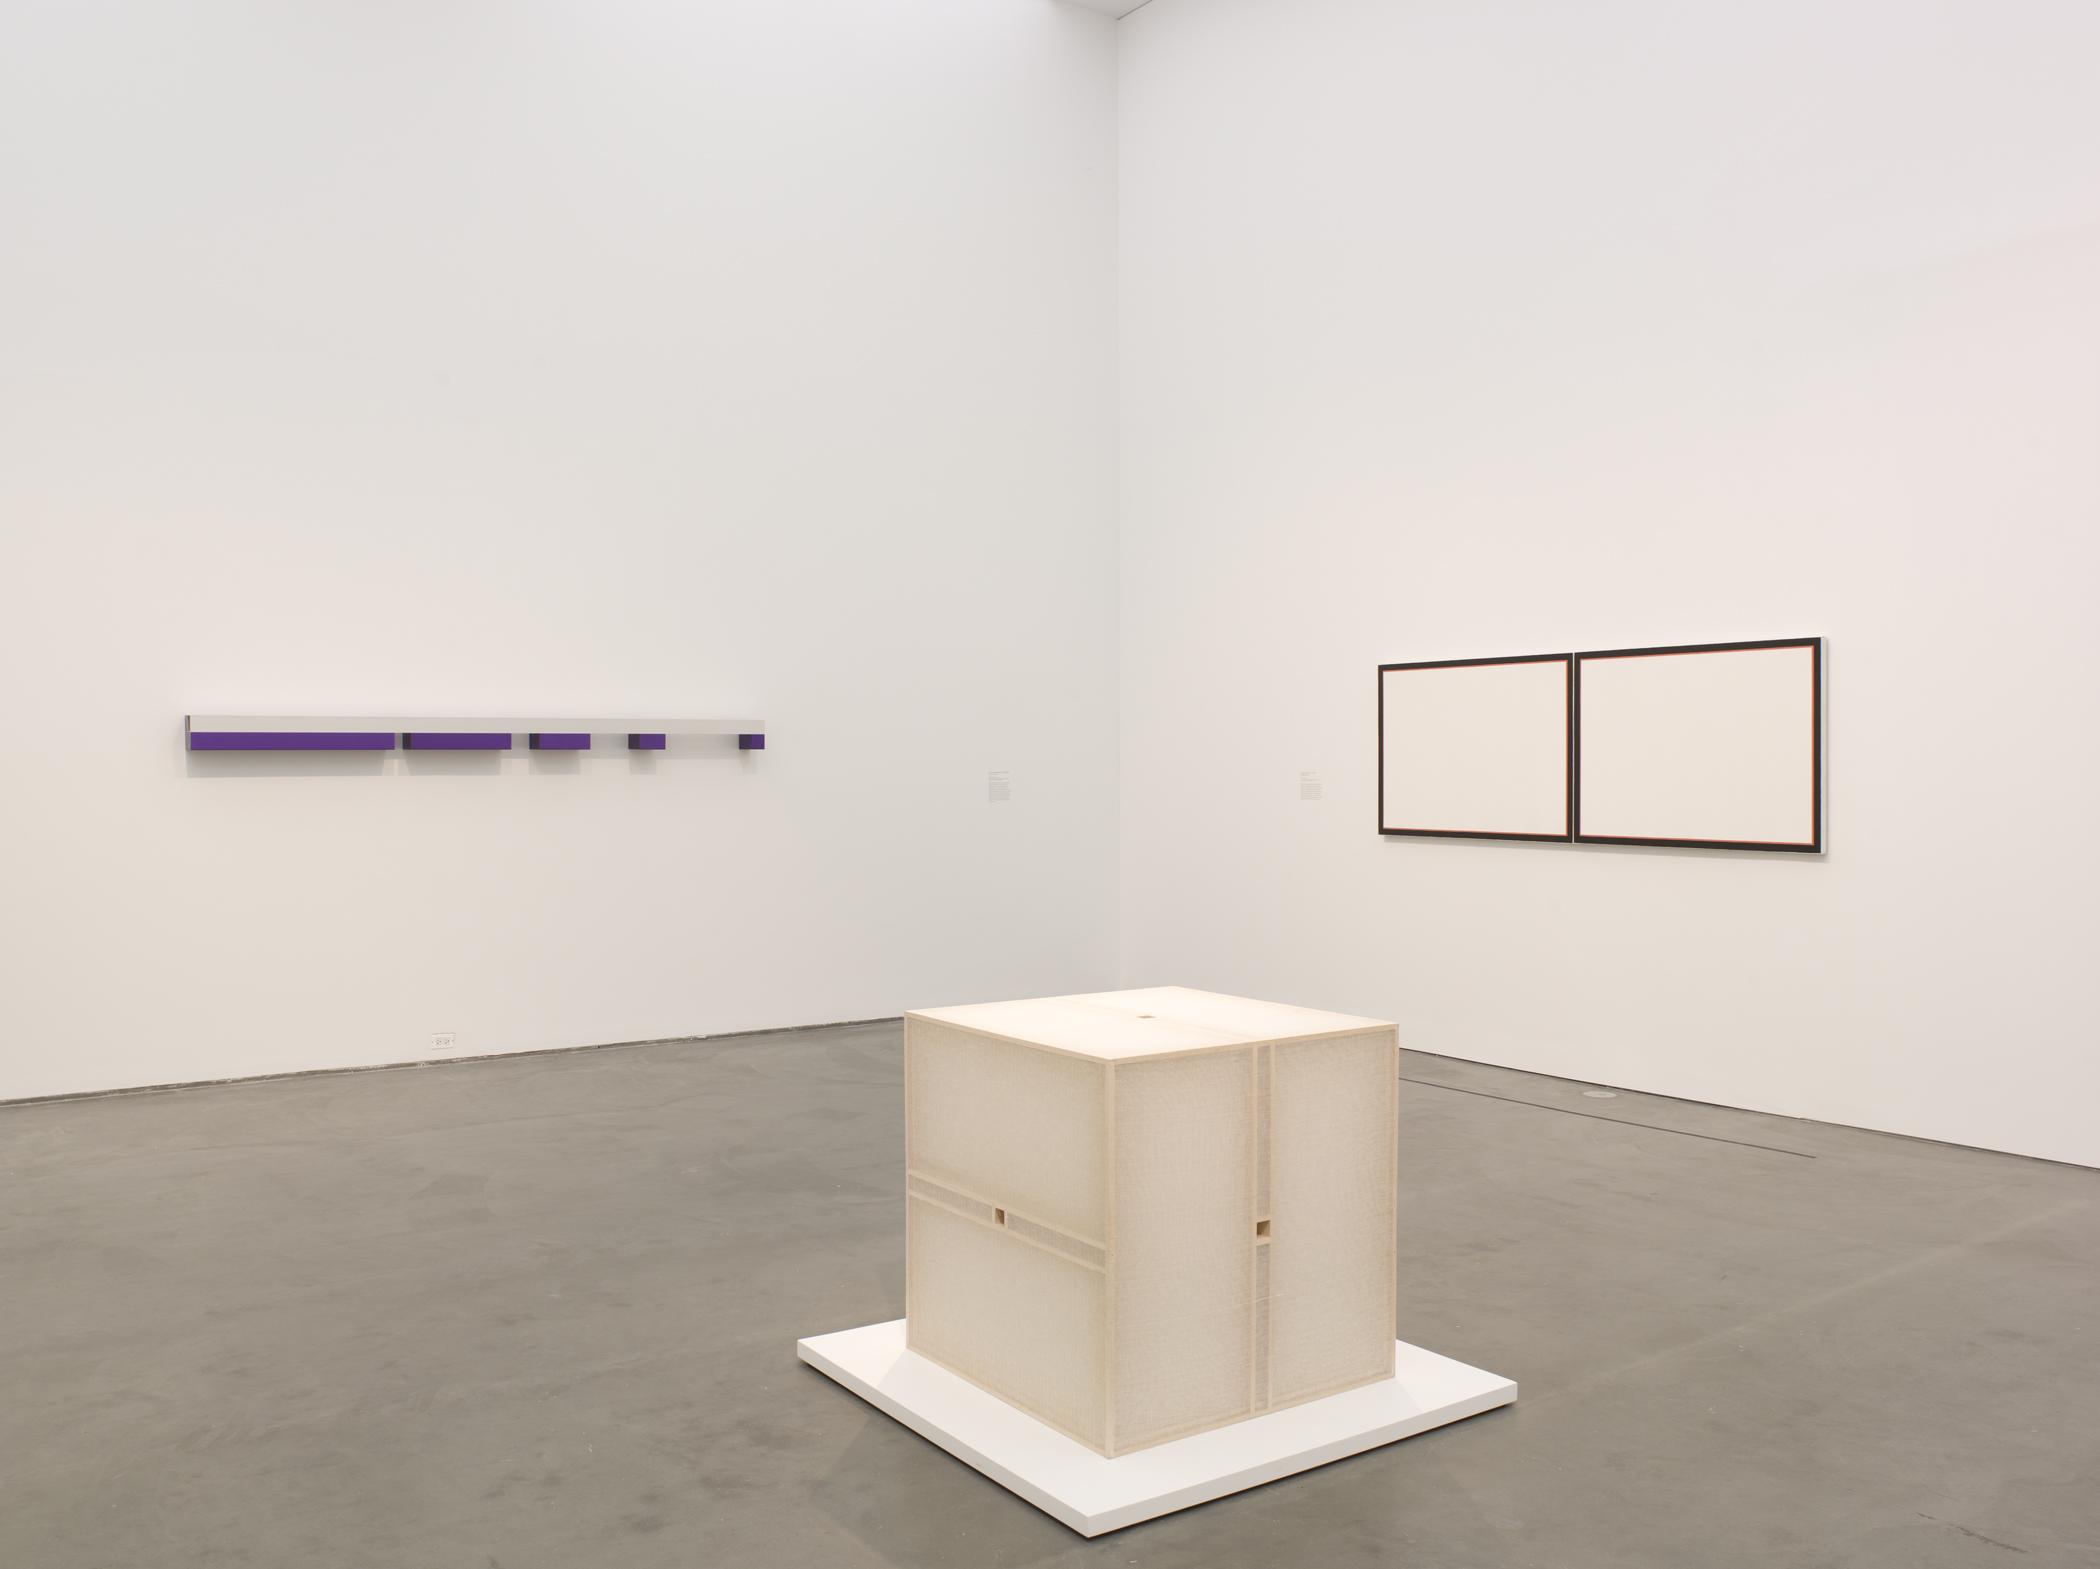 Gallery view of three minimalist artworks on the walls and floor